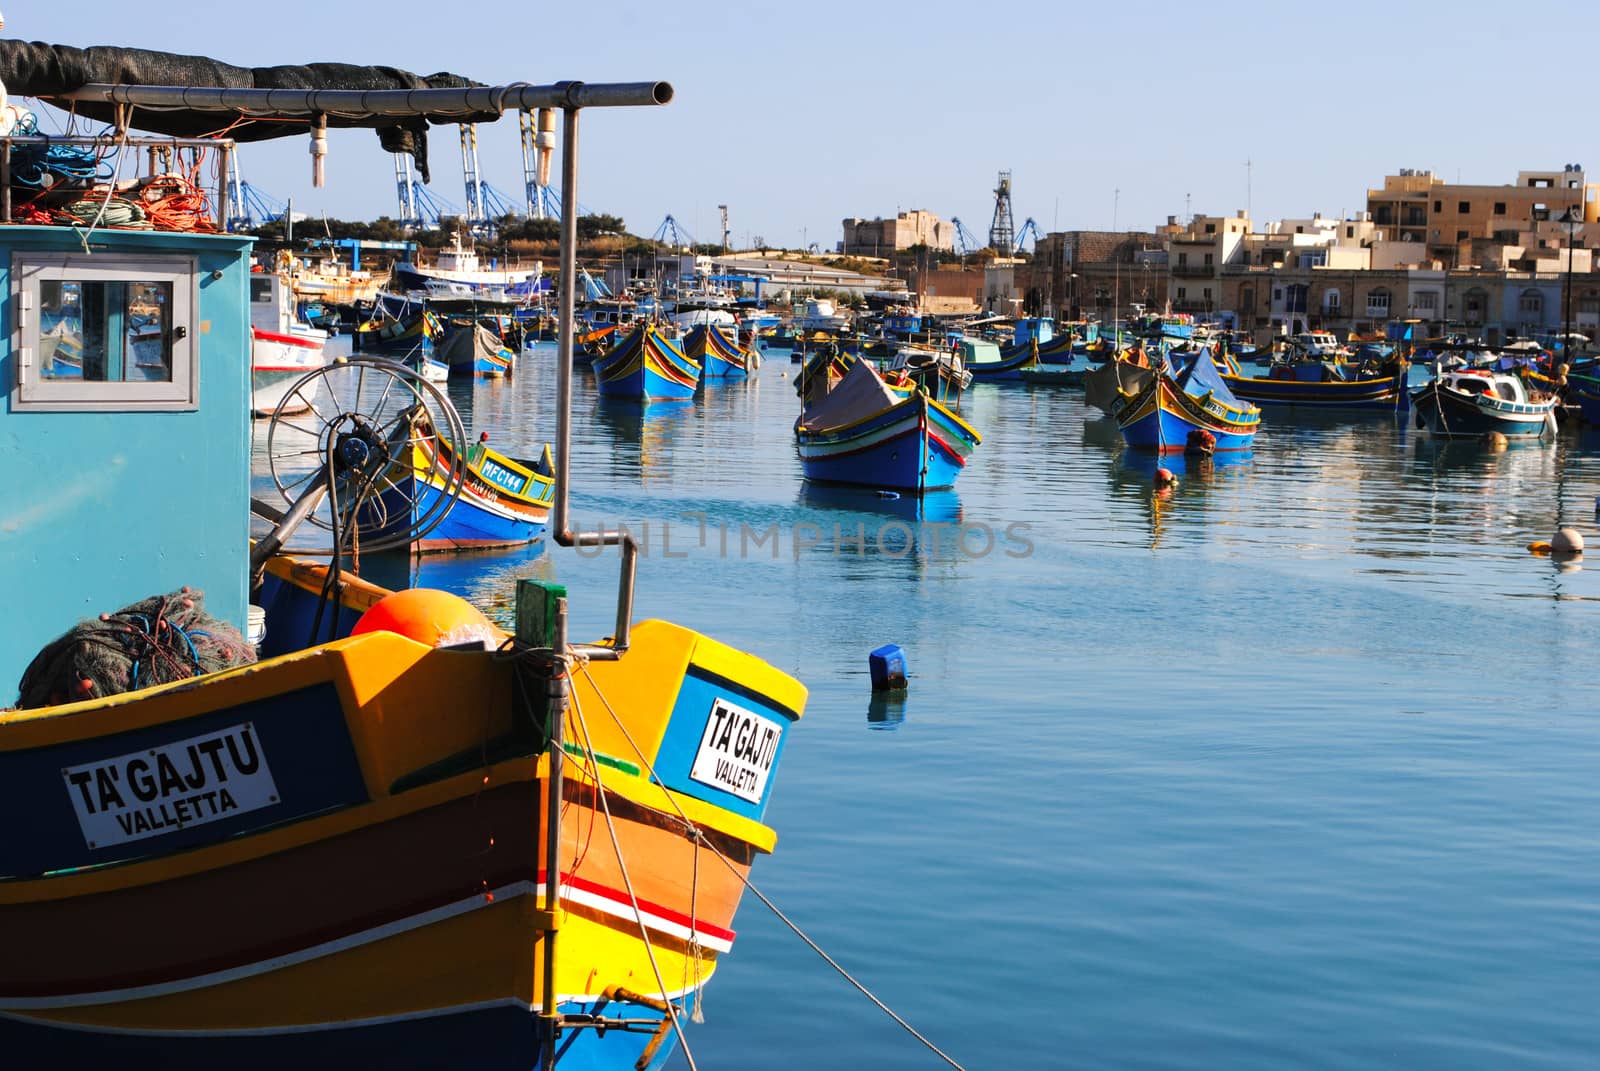 Marsaxlokk is a traditional fishing village located in the south-eastern part of Malta, with a population of 3,277 people.